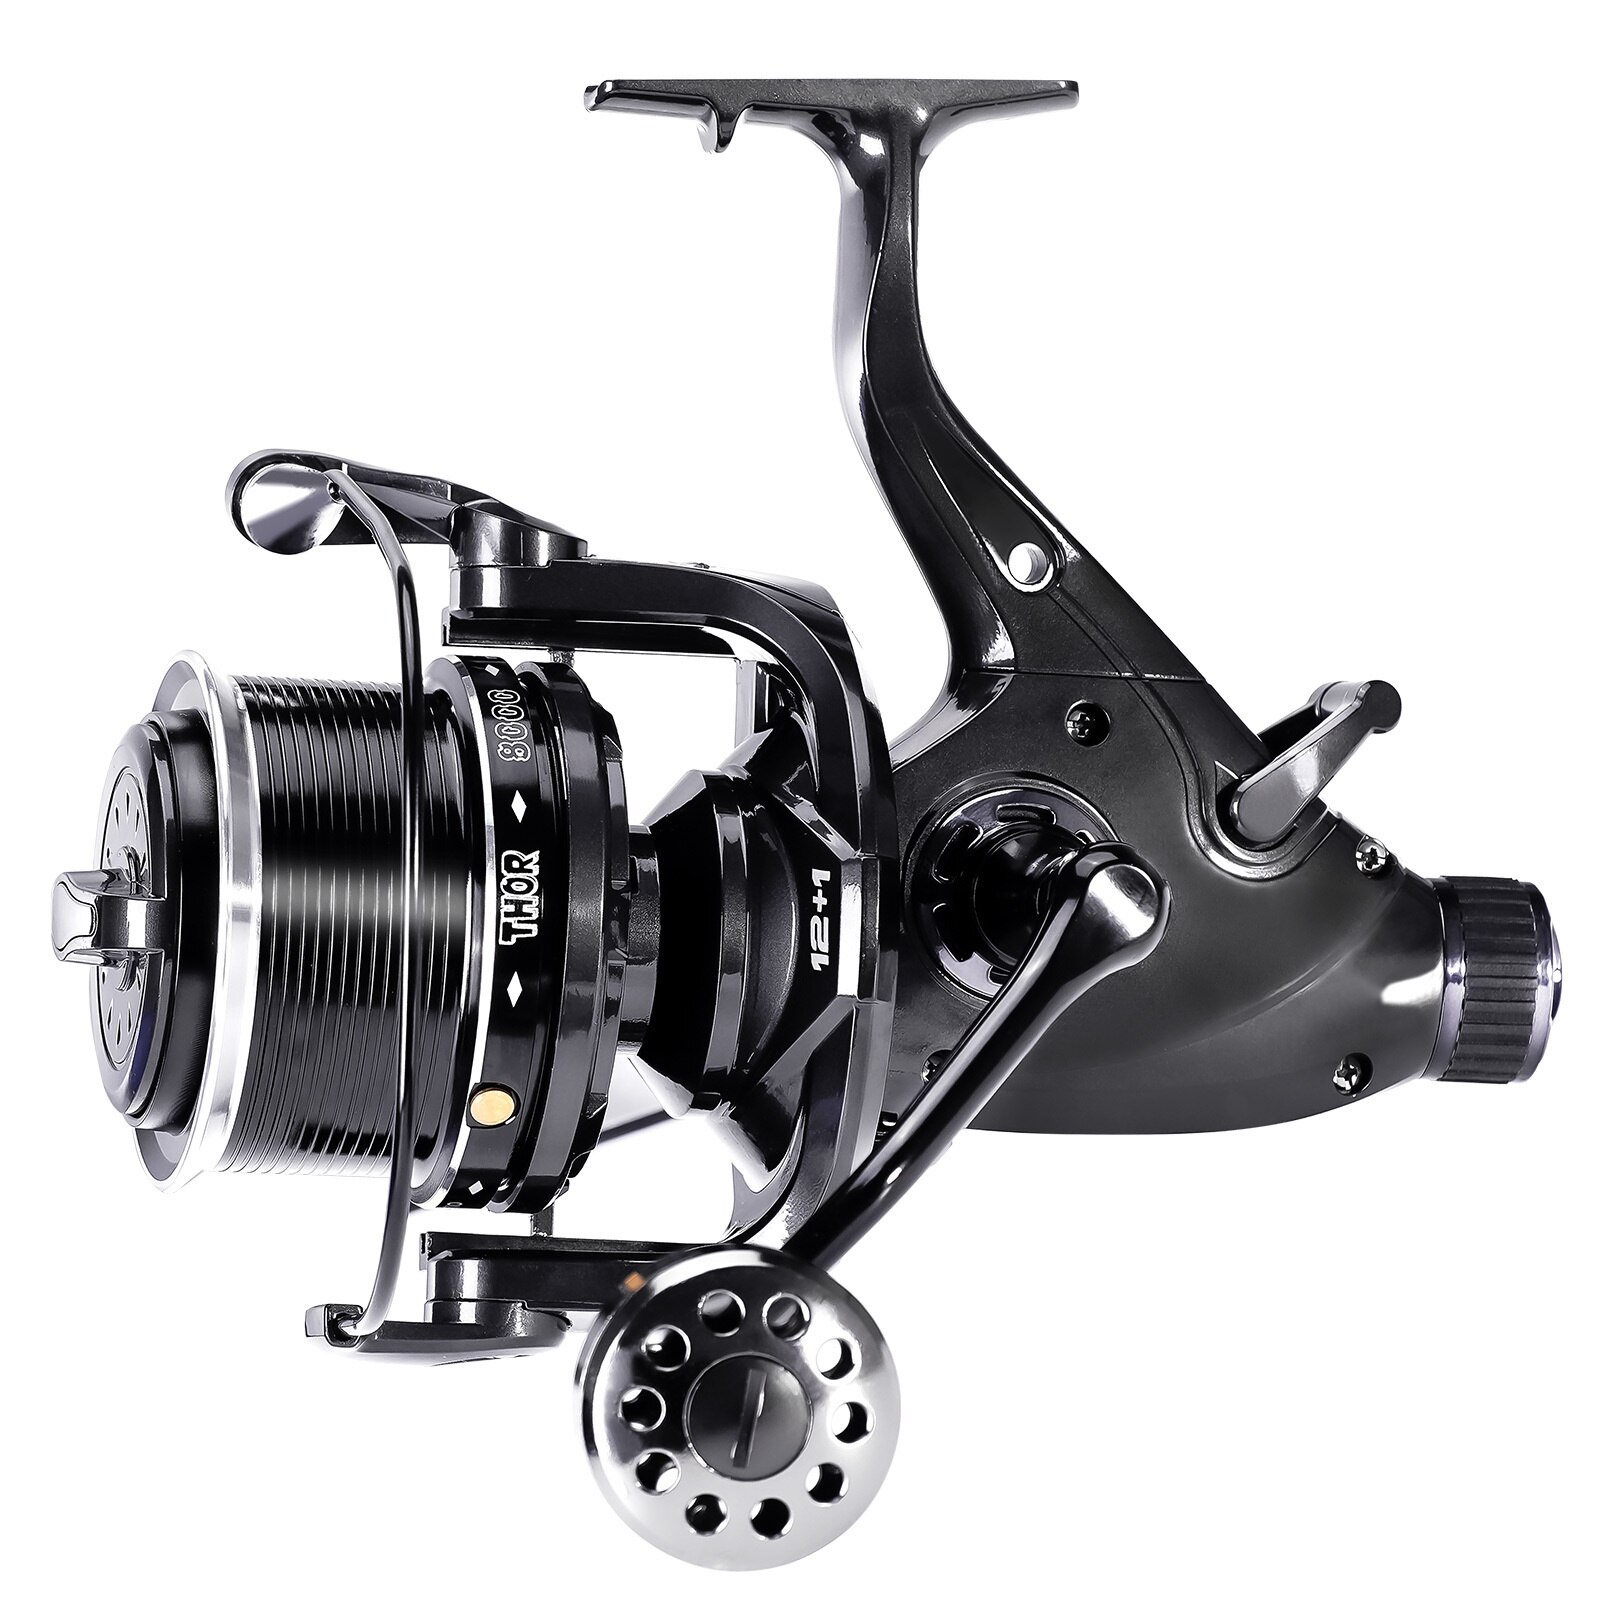 Fishing Reel Distant Wheel Sea Surf Spinning Reels Carbon Drag 27kg 13+1BB  Saltwater Boat Coil Accesorios Open Face Carretilha